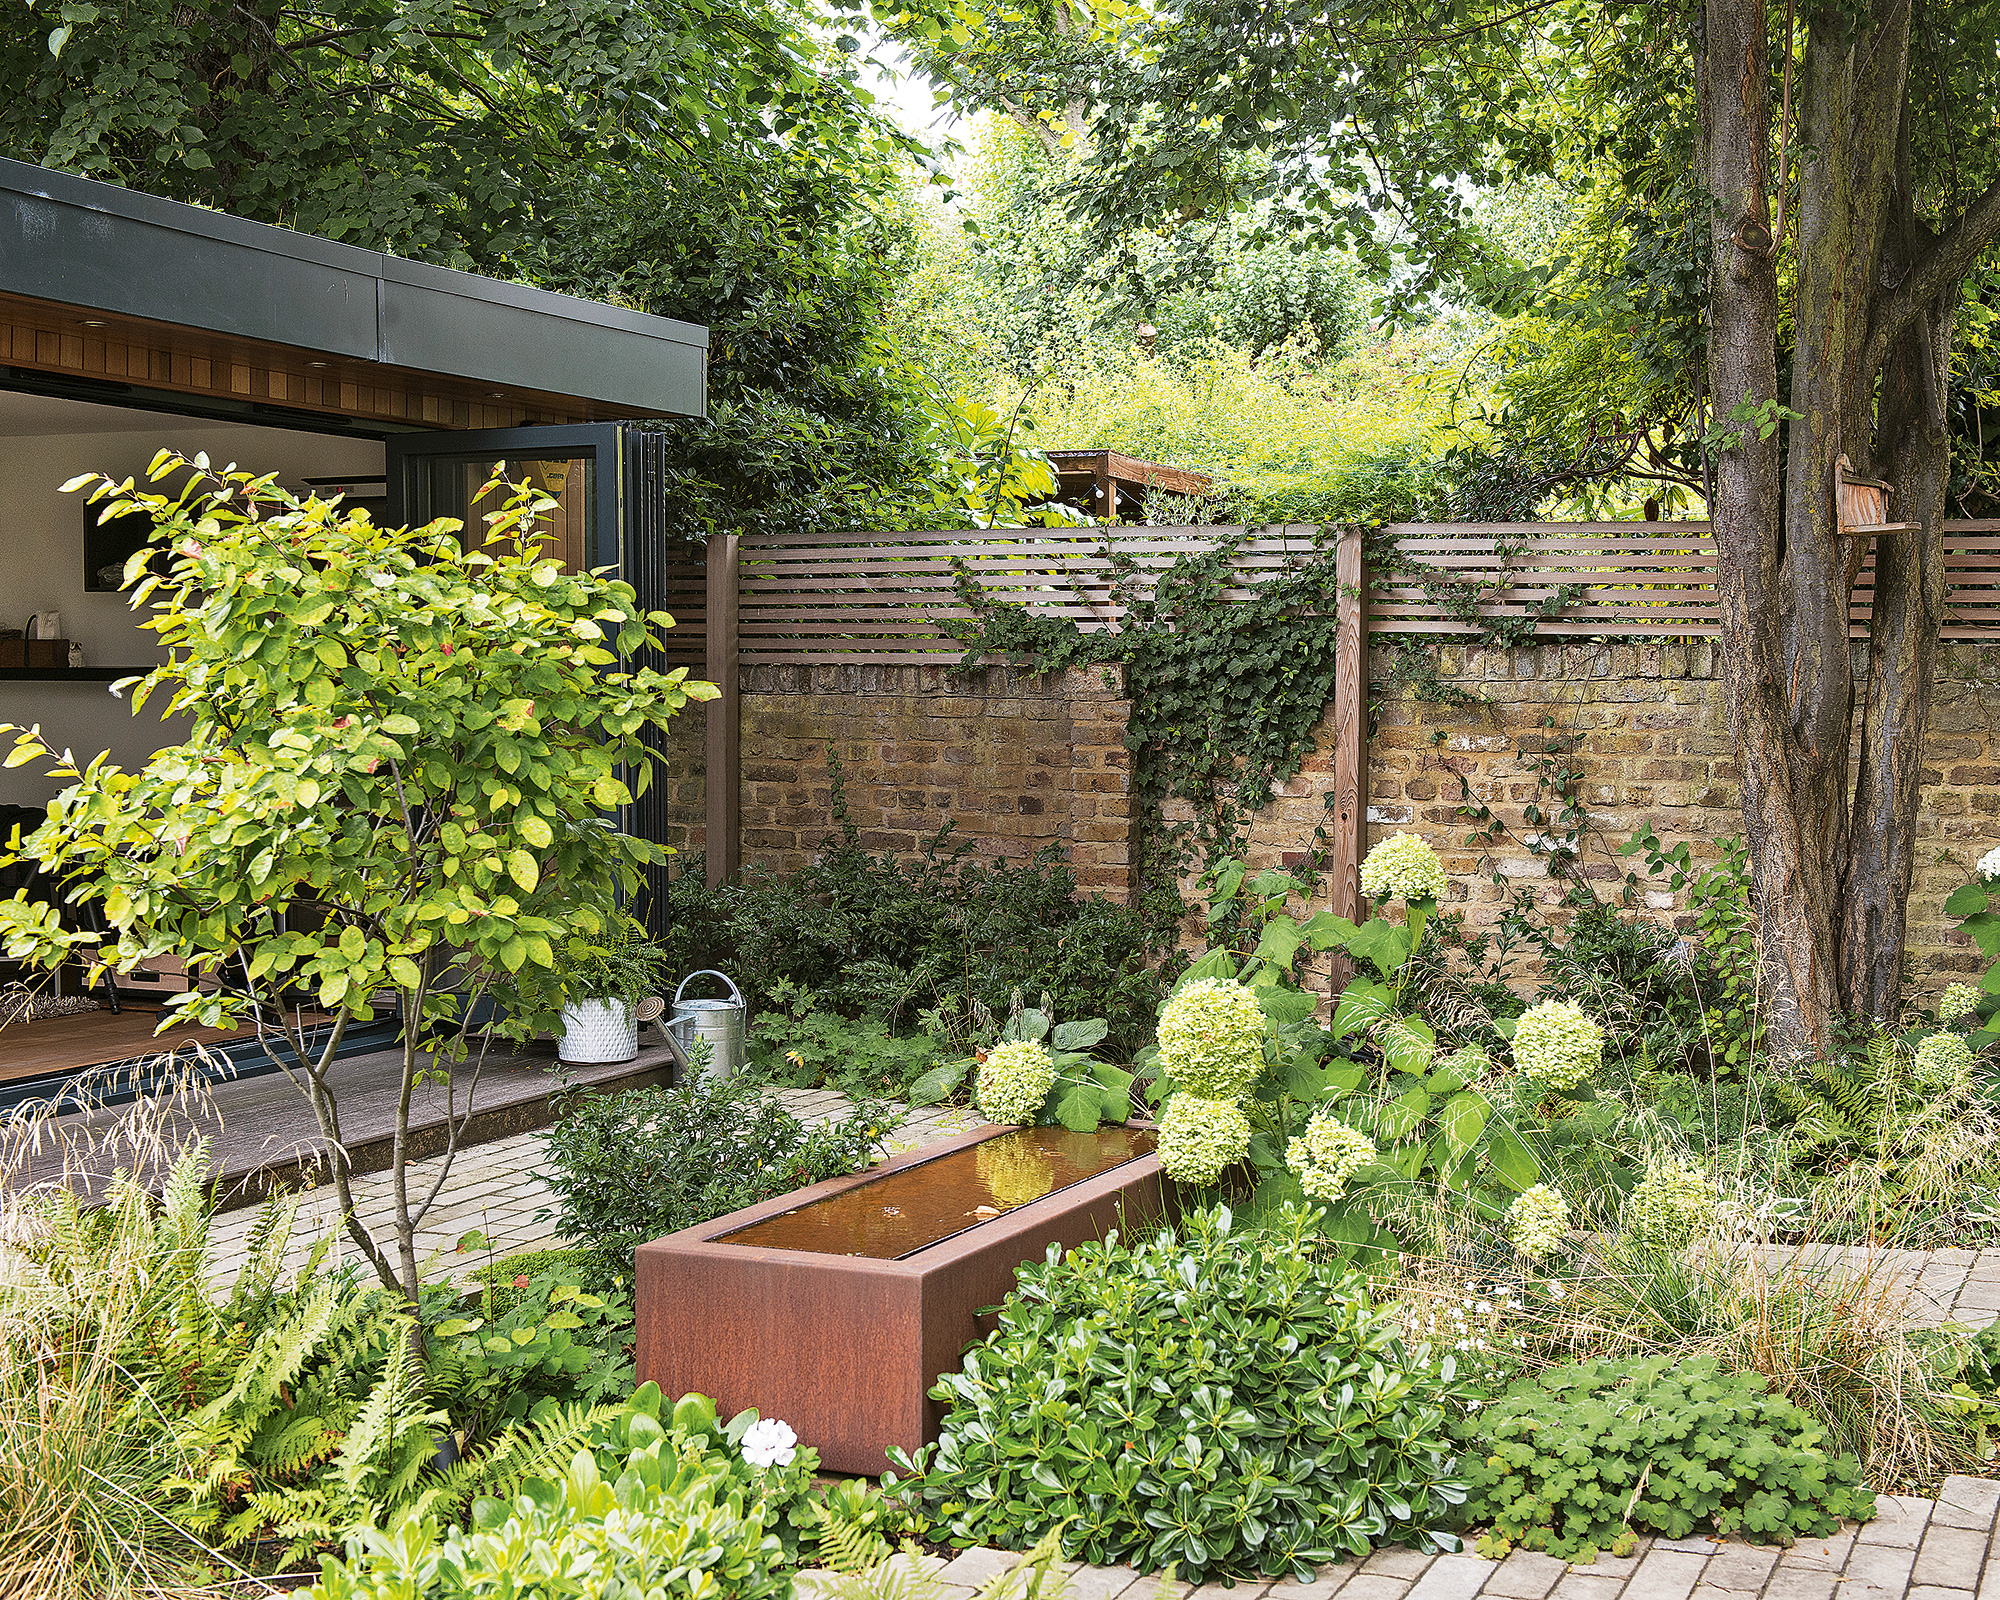 Small garden with brick wall, brick flooring, metal water container, flowers, bushes, trees